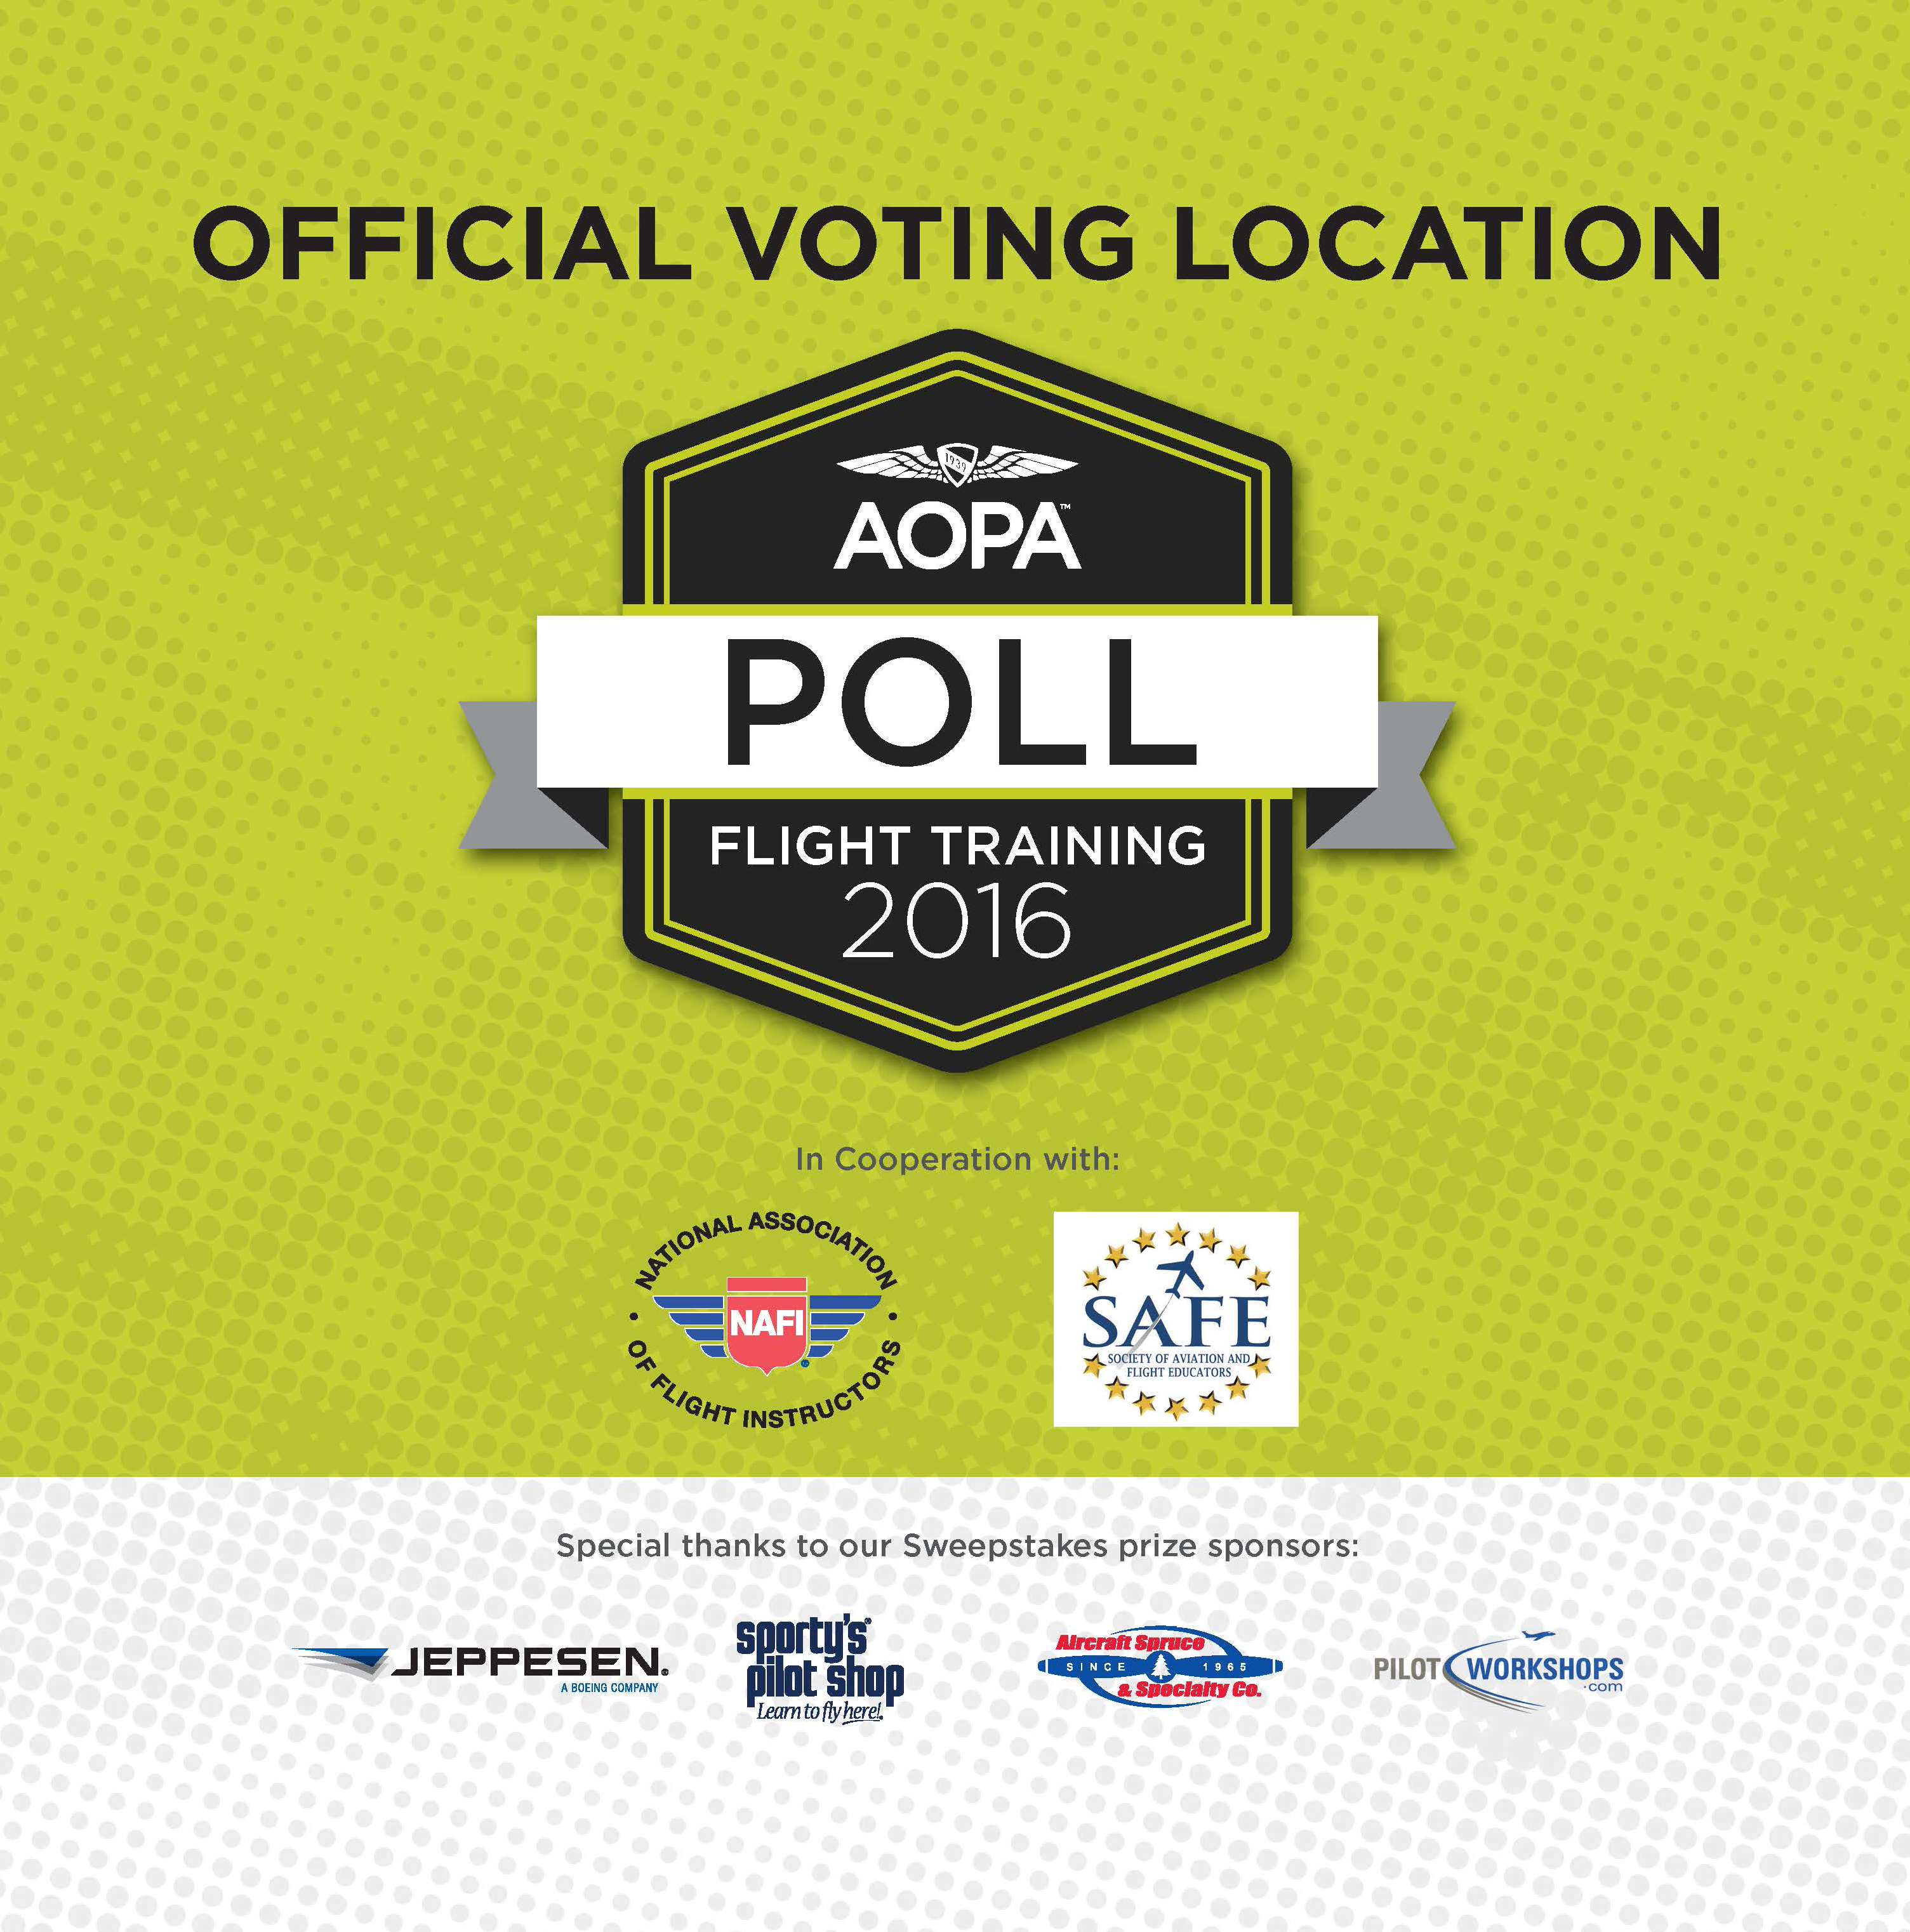 Aviators who are ready to vote before November's general election can cast their ballots in the 2016 AOPA Flight Training Poll before voting closes Aug. 22. Click here to take the poll.